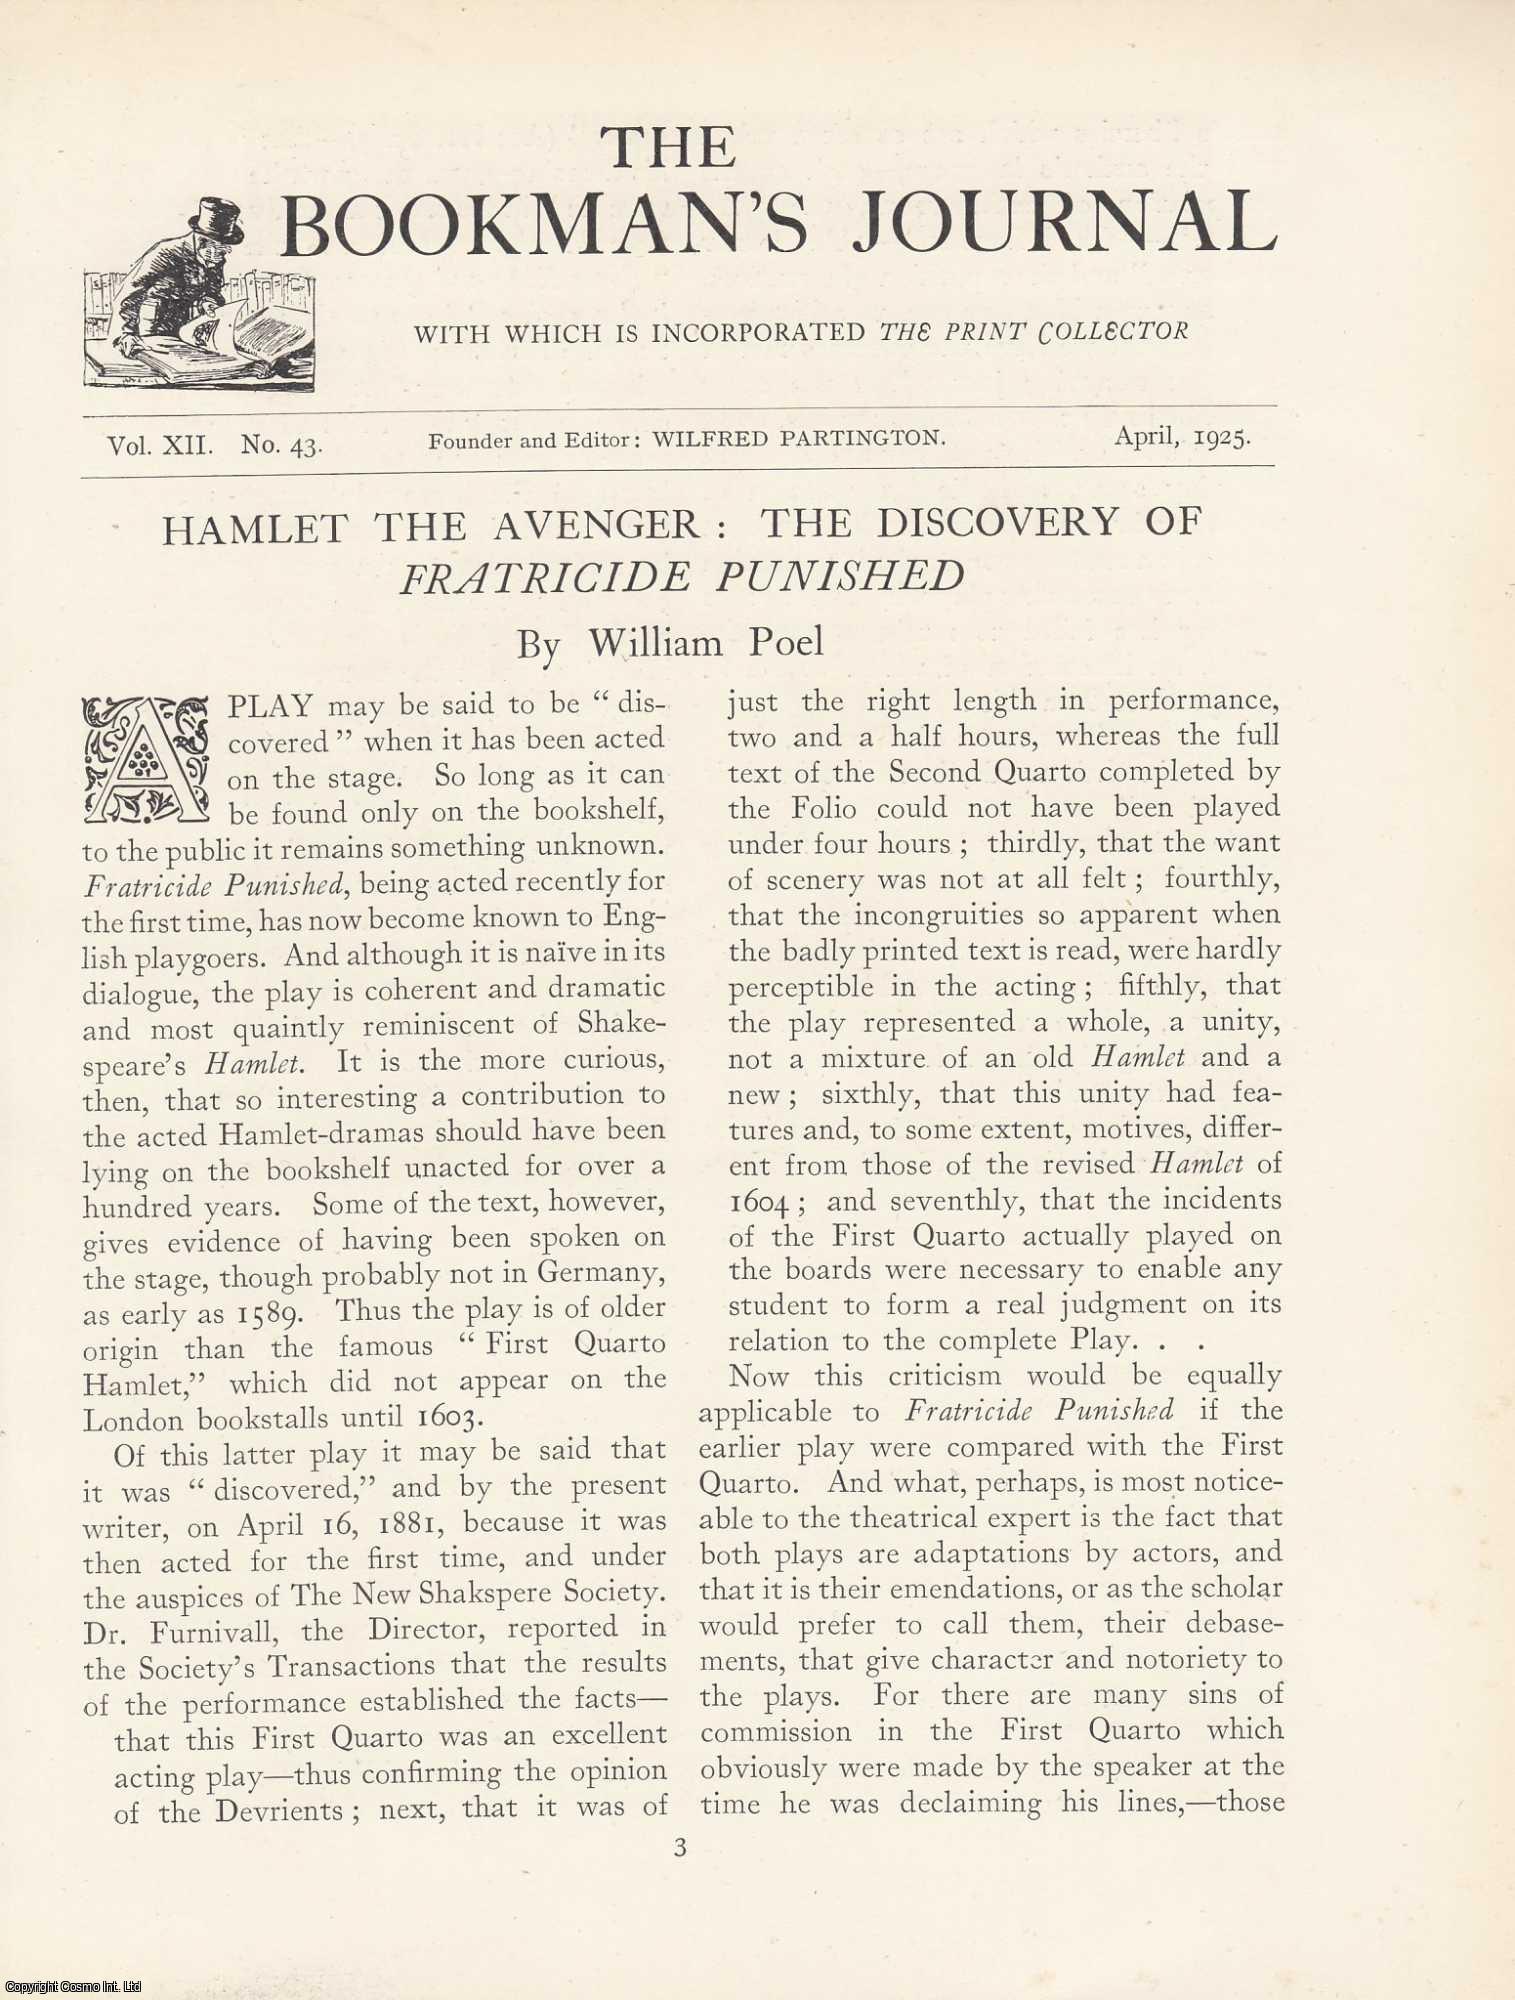 William Poel - Hamlet the Avenger: The Discovery of Fratricide Punished. An original article from The Bookman's Journal.